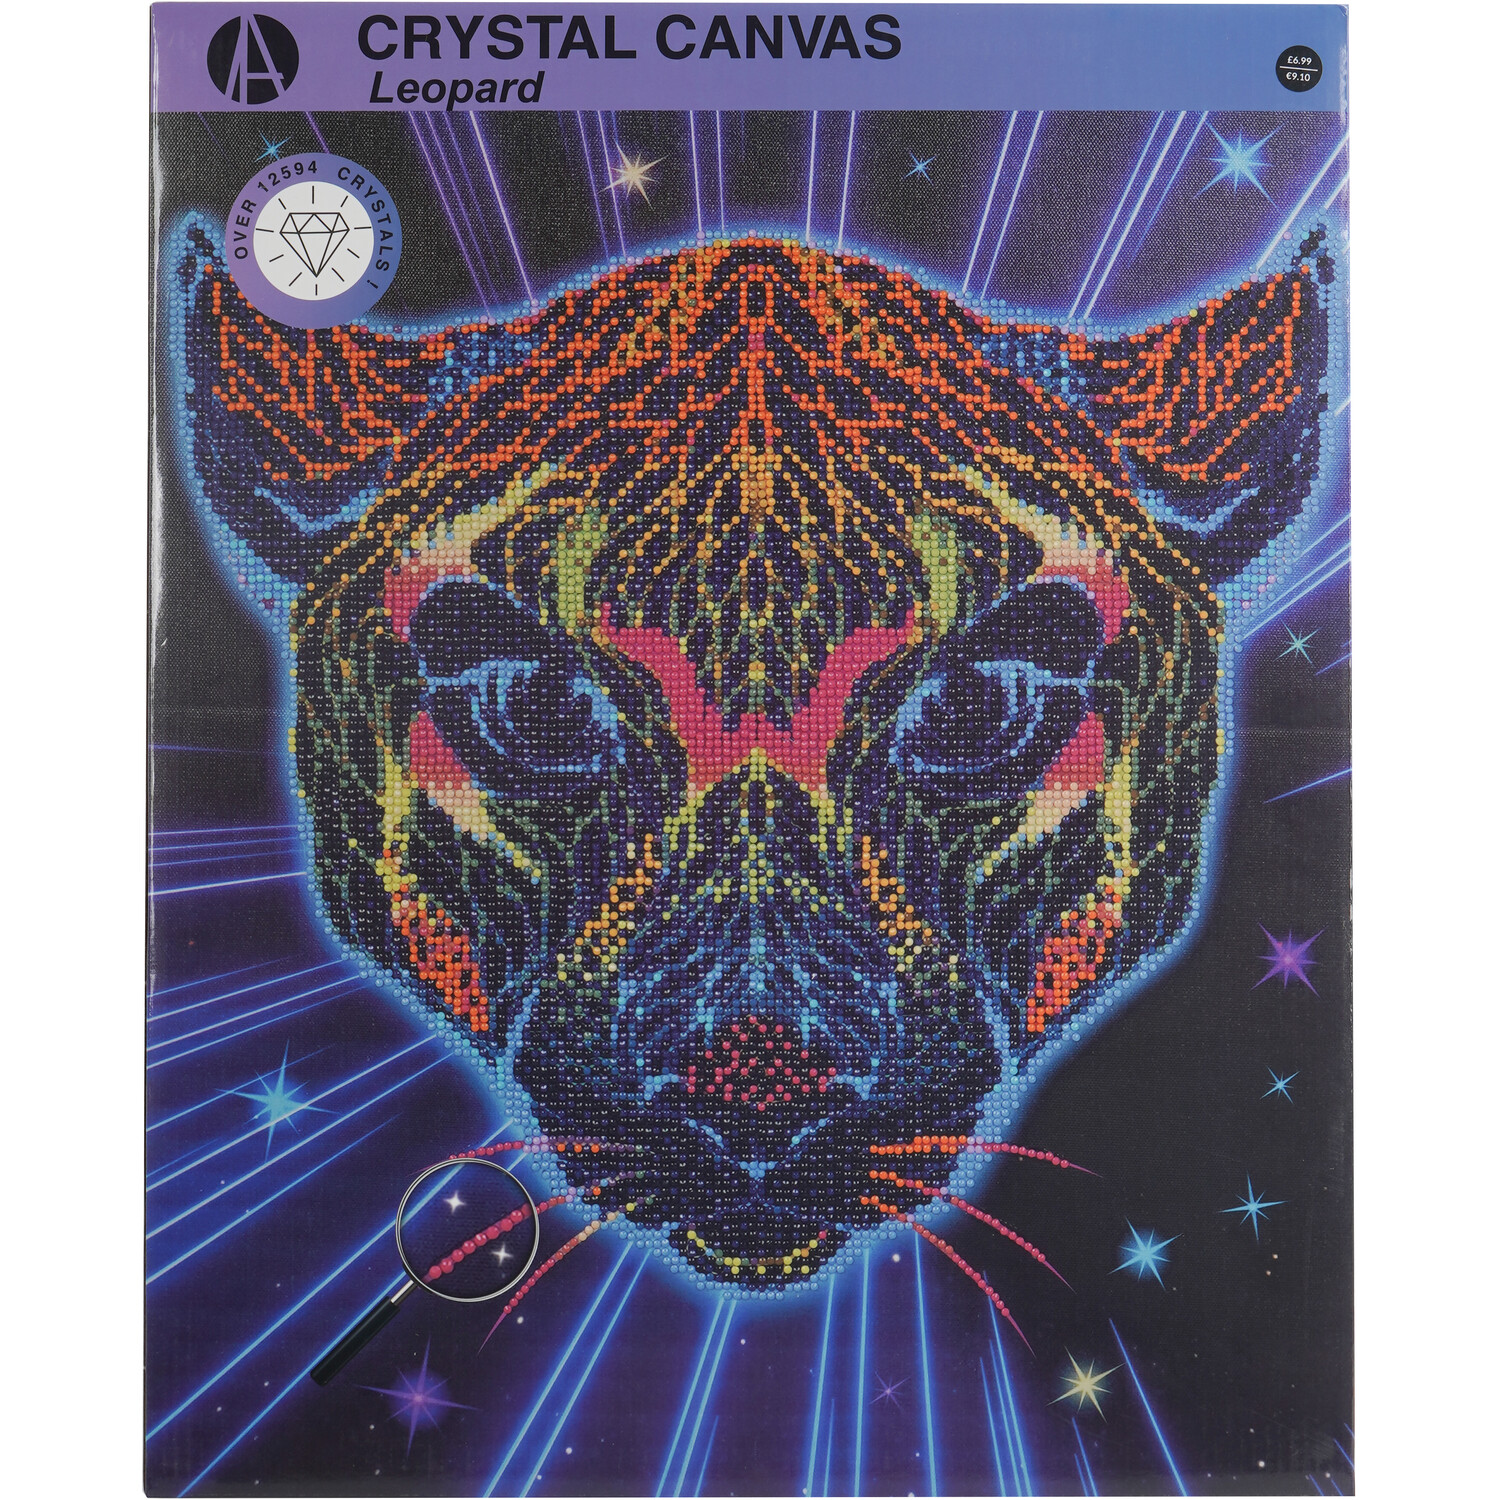 Crystal Canvas Wolf or Leopard Image 4